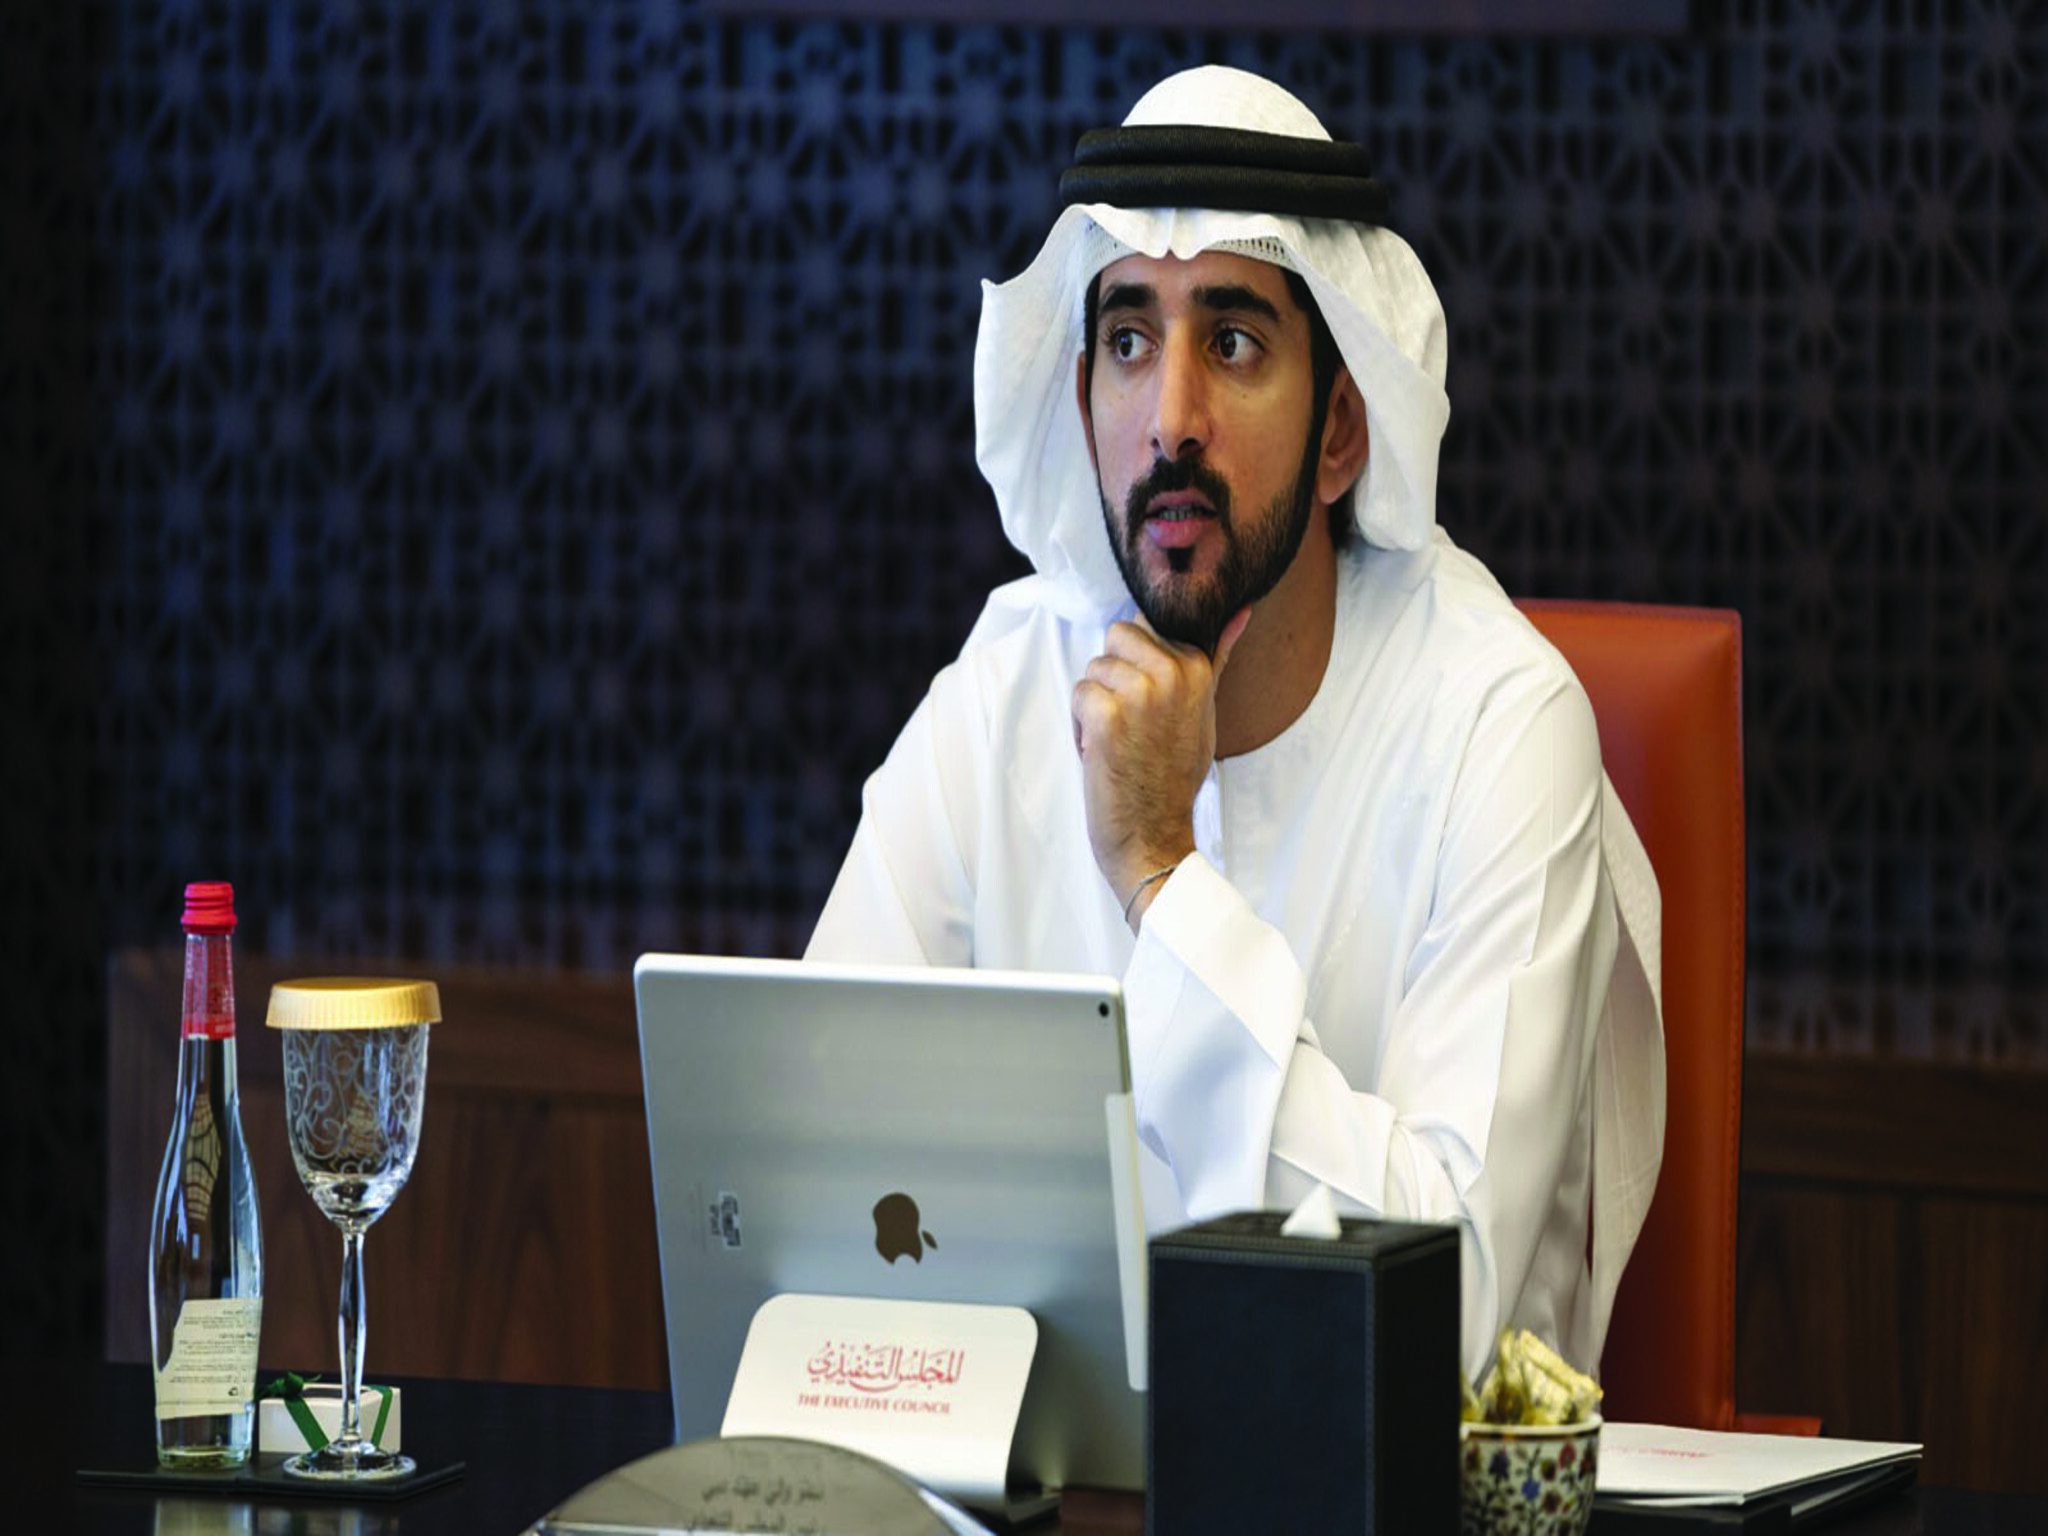 The UAE grants golden residency and a financial reward to residents who hold these jobs